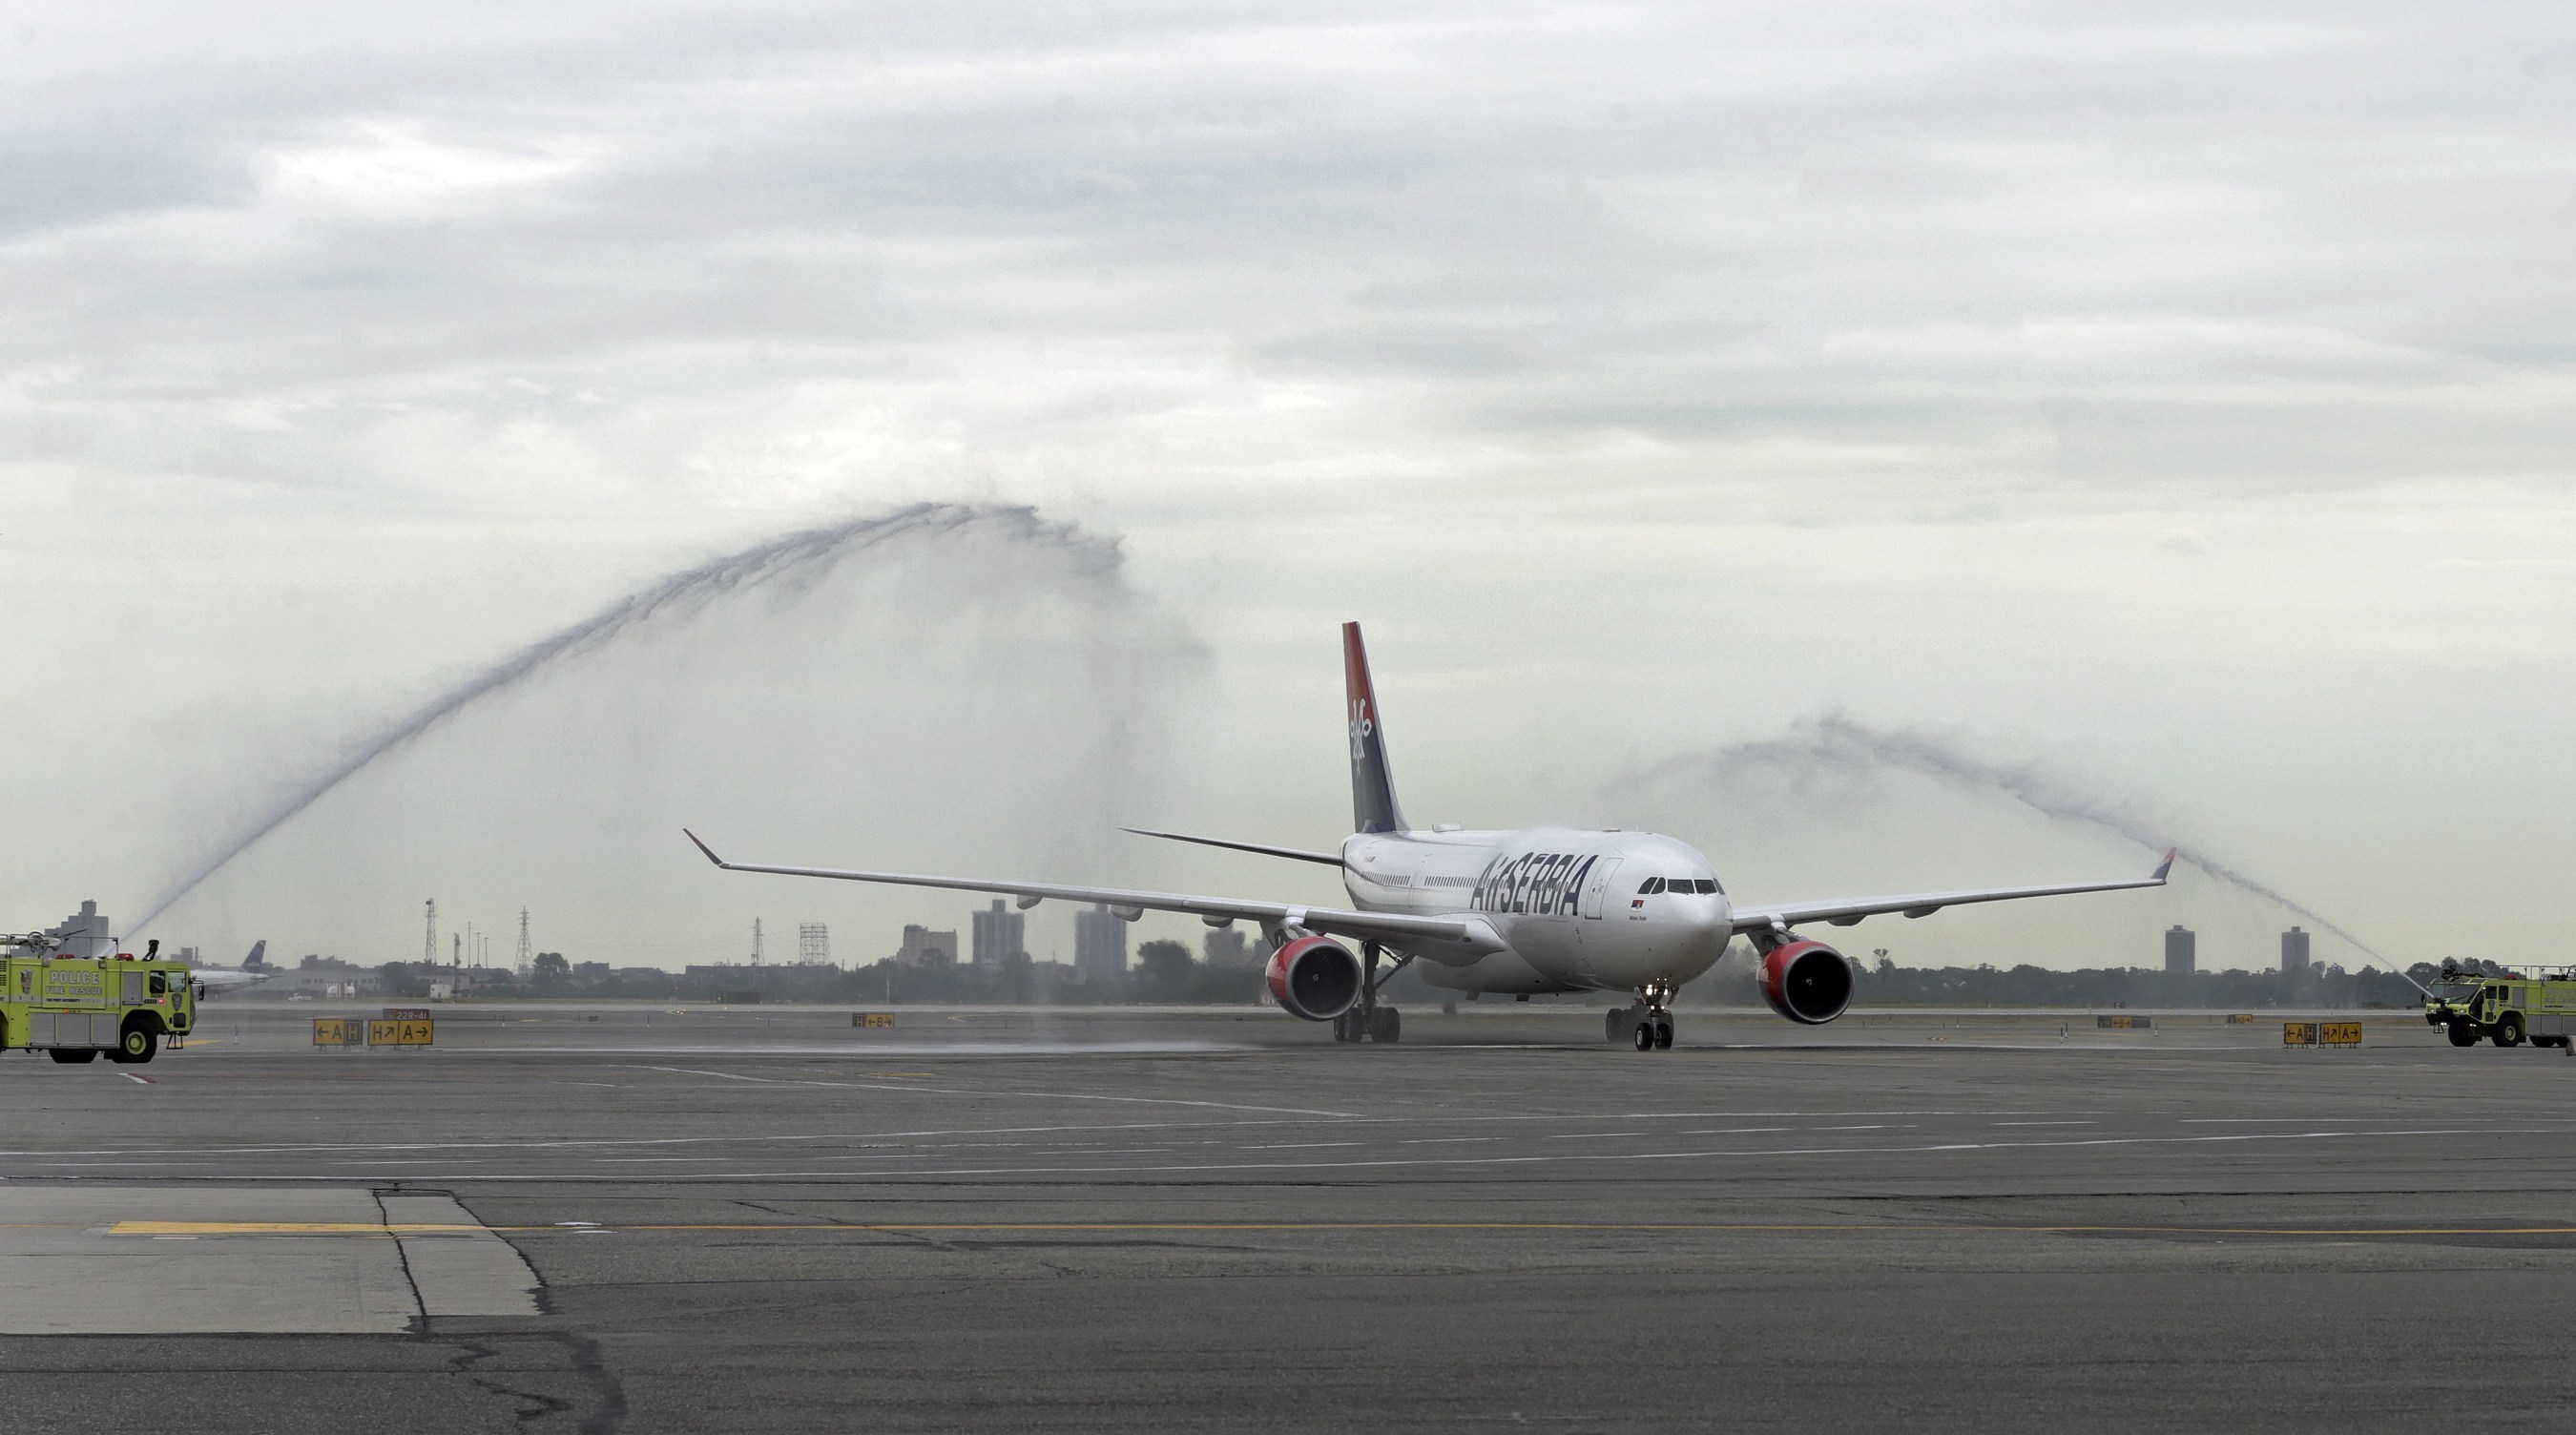 Air Serbia's inaugural service from Belgrade to New York, flight JU 500, is welcomed to JFK International Airport with a water-cannon salute.